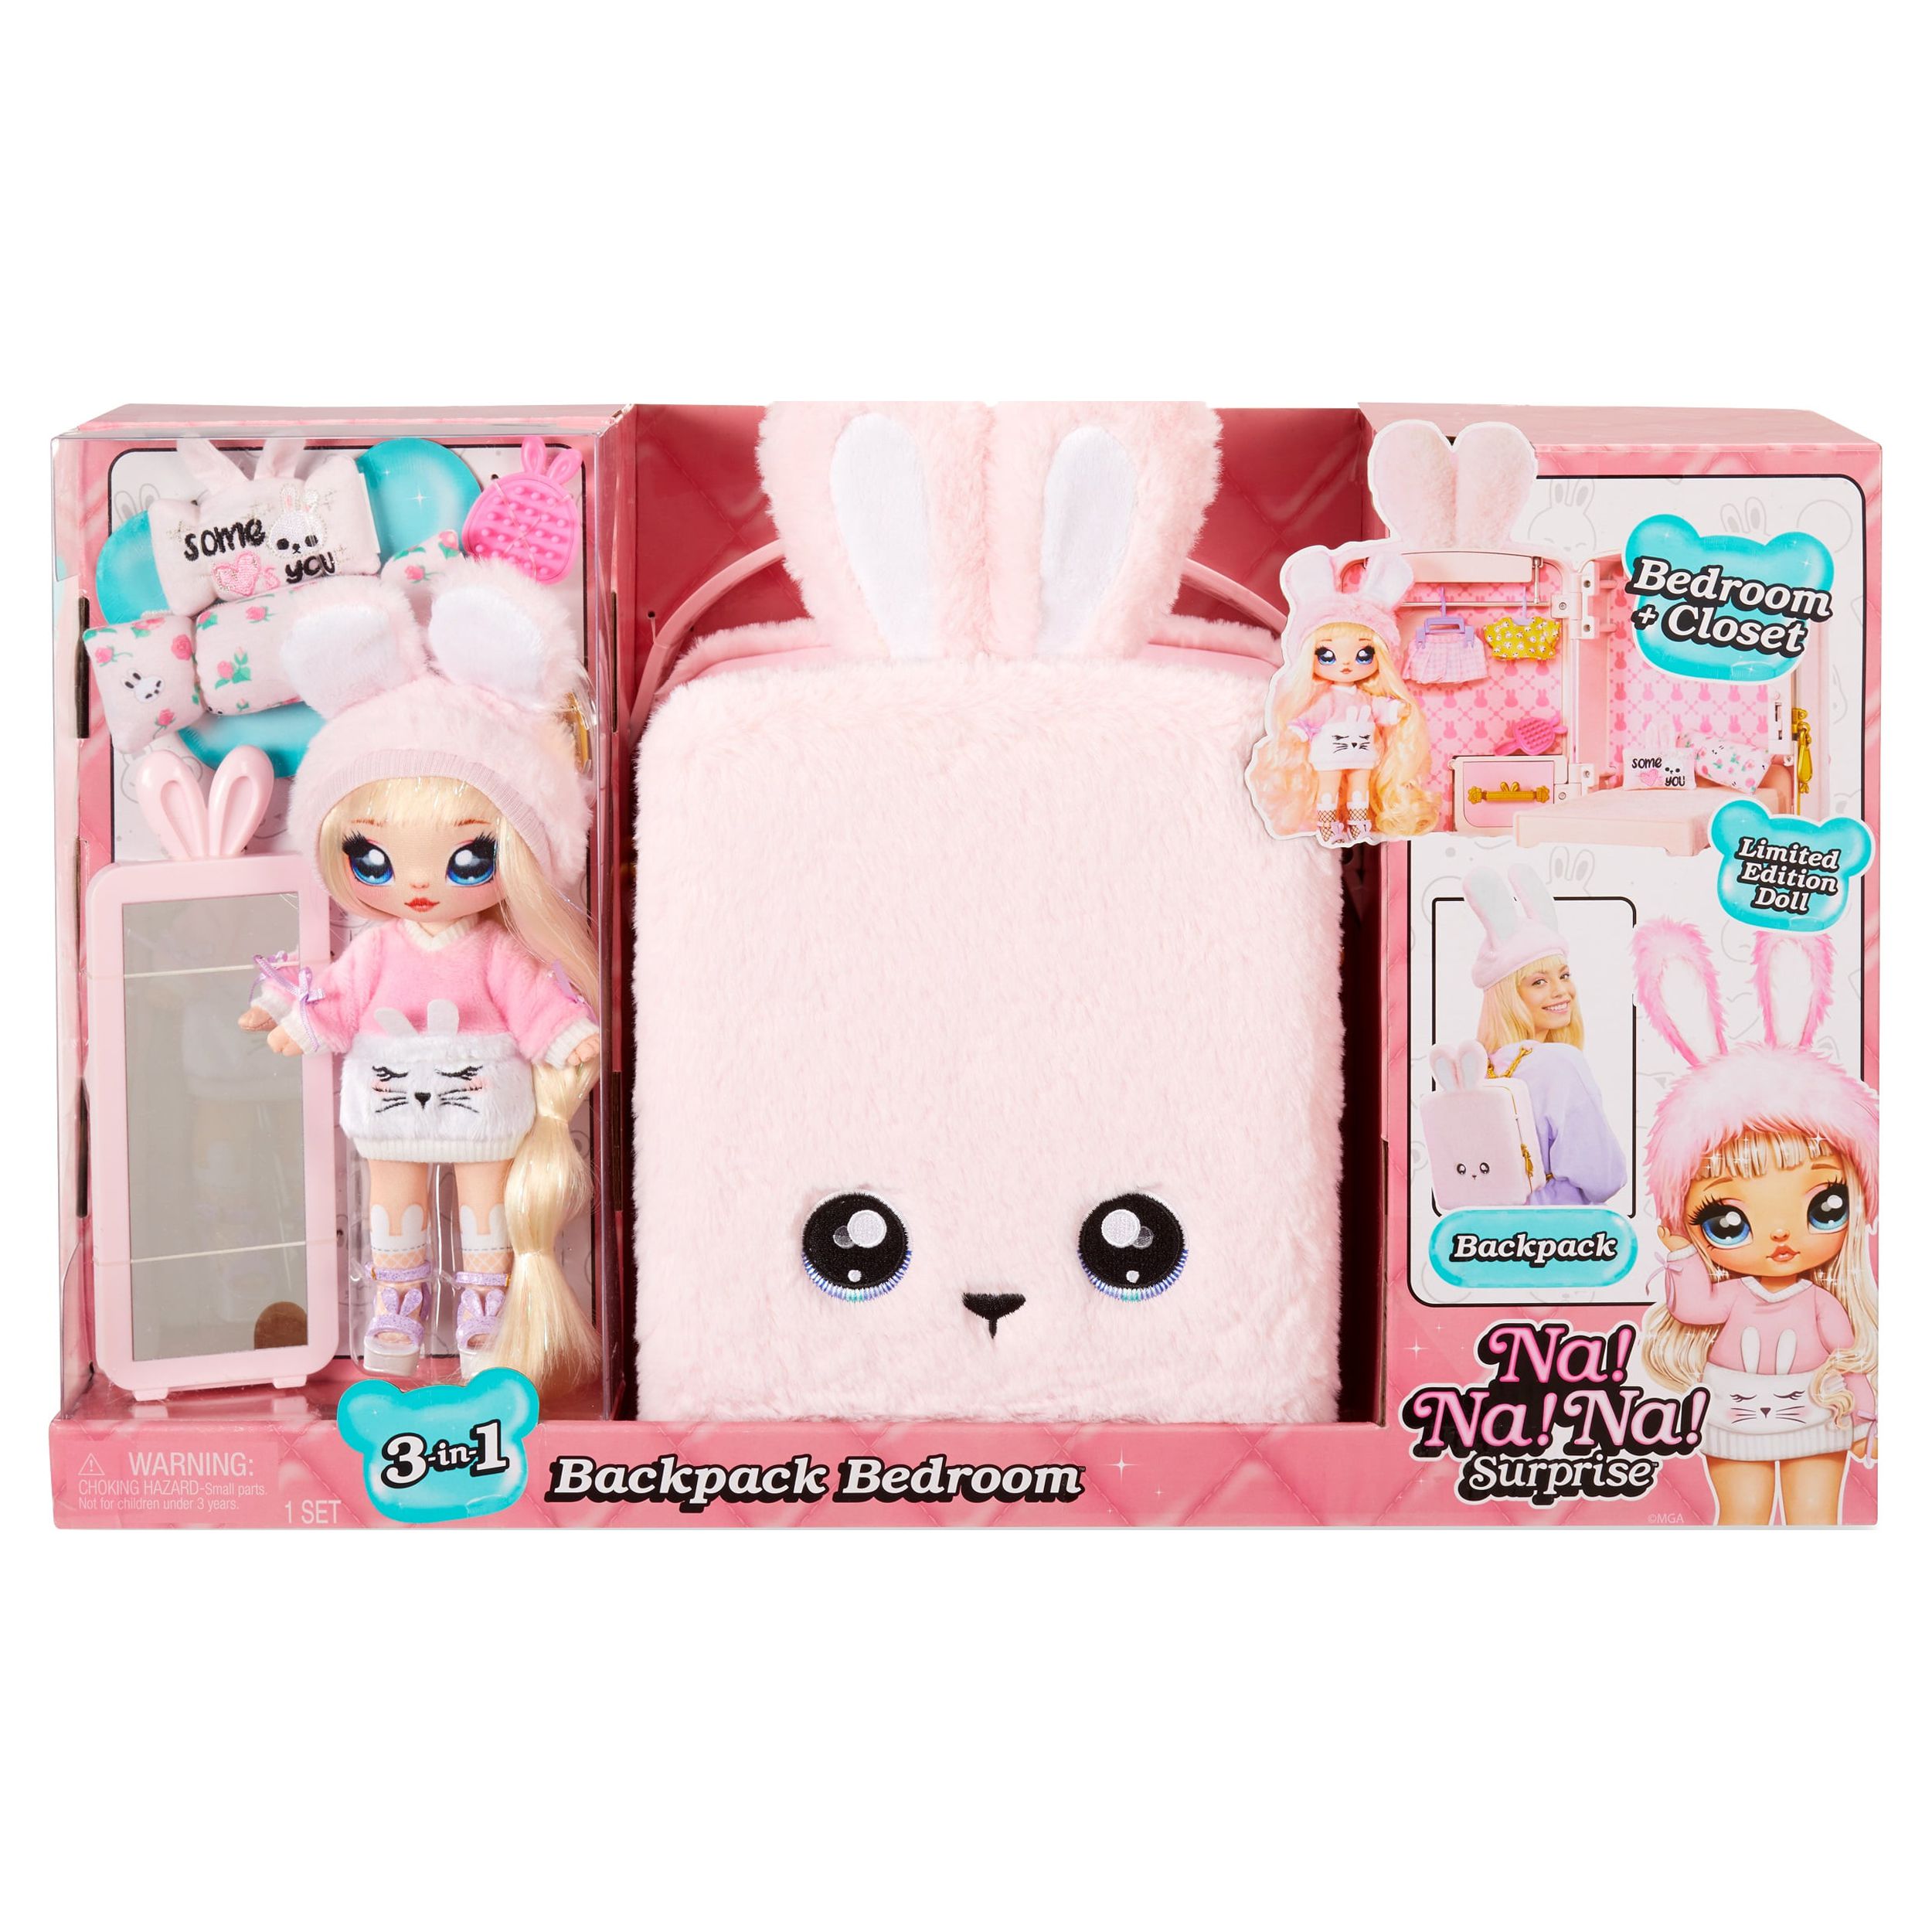 Na! Na! Na! Surprise 3-in-1 Backpack Bedroom Pink Bunny Playset with Limited Edition Doll Playset - image 1 of 5